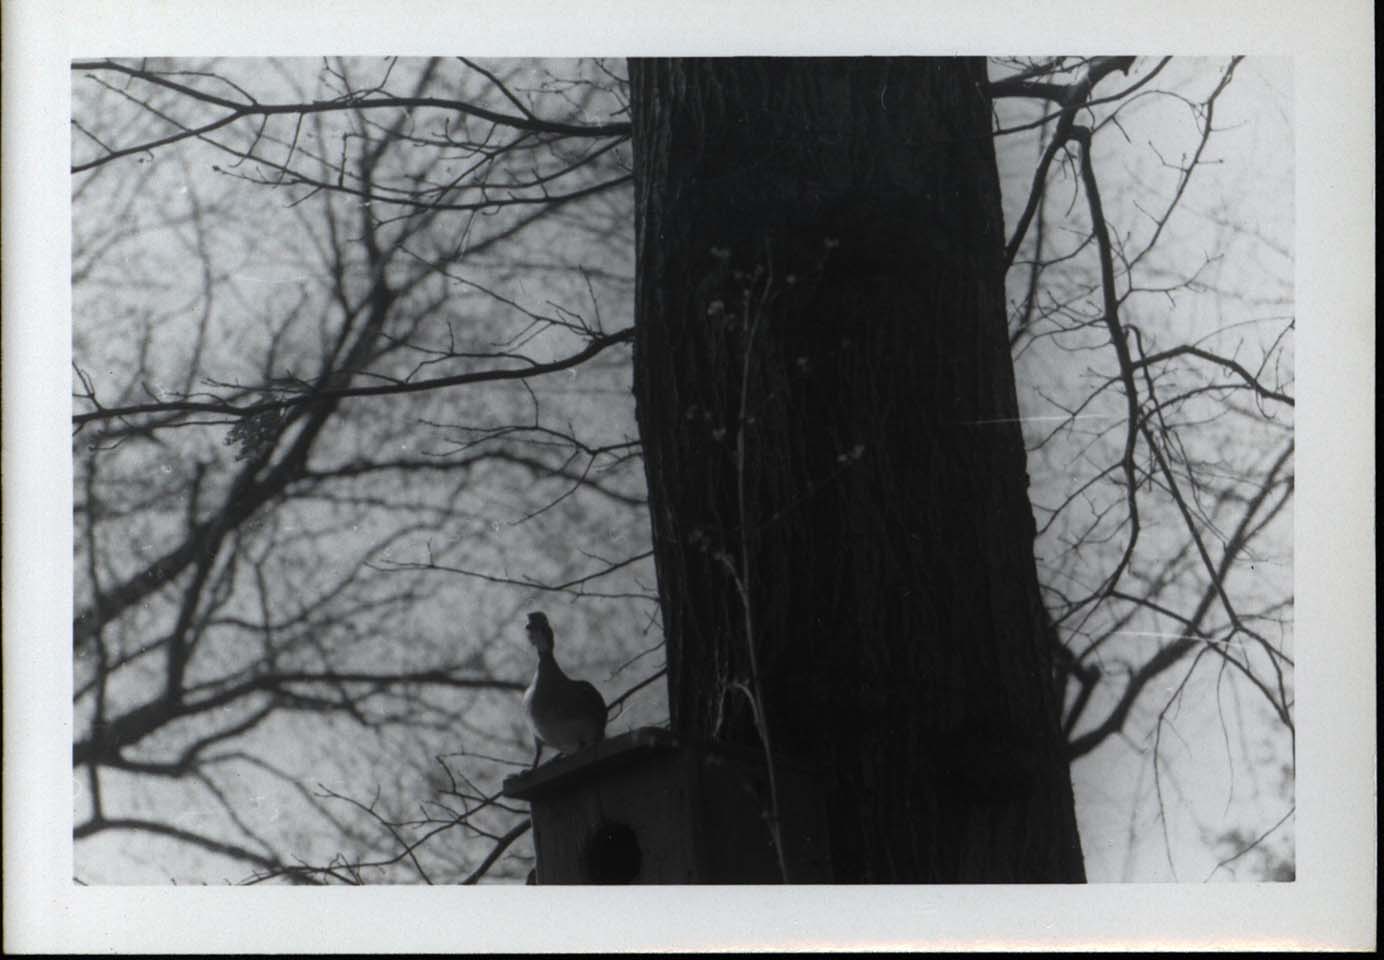 Photograph of a Wood Duck perched on a Wood Duck house